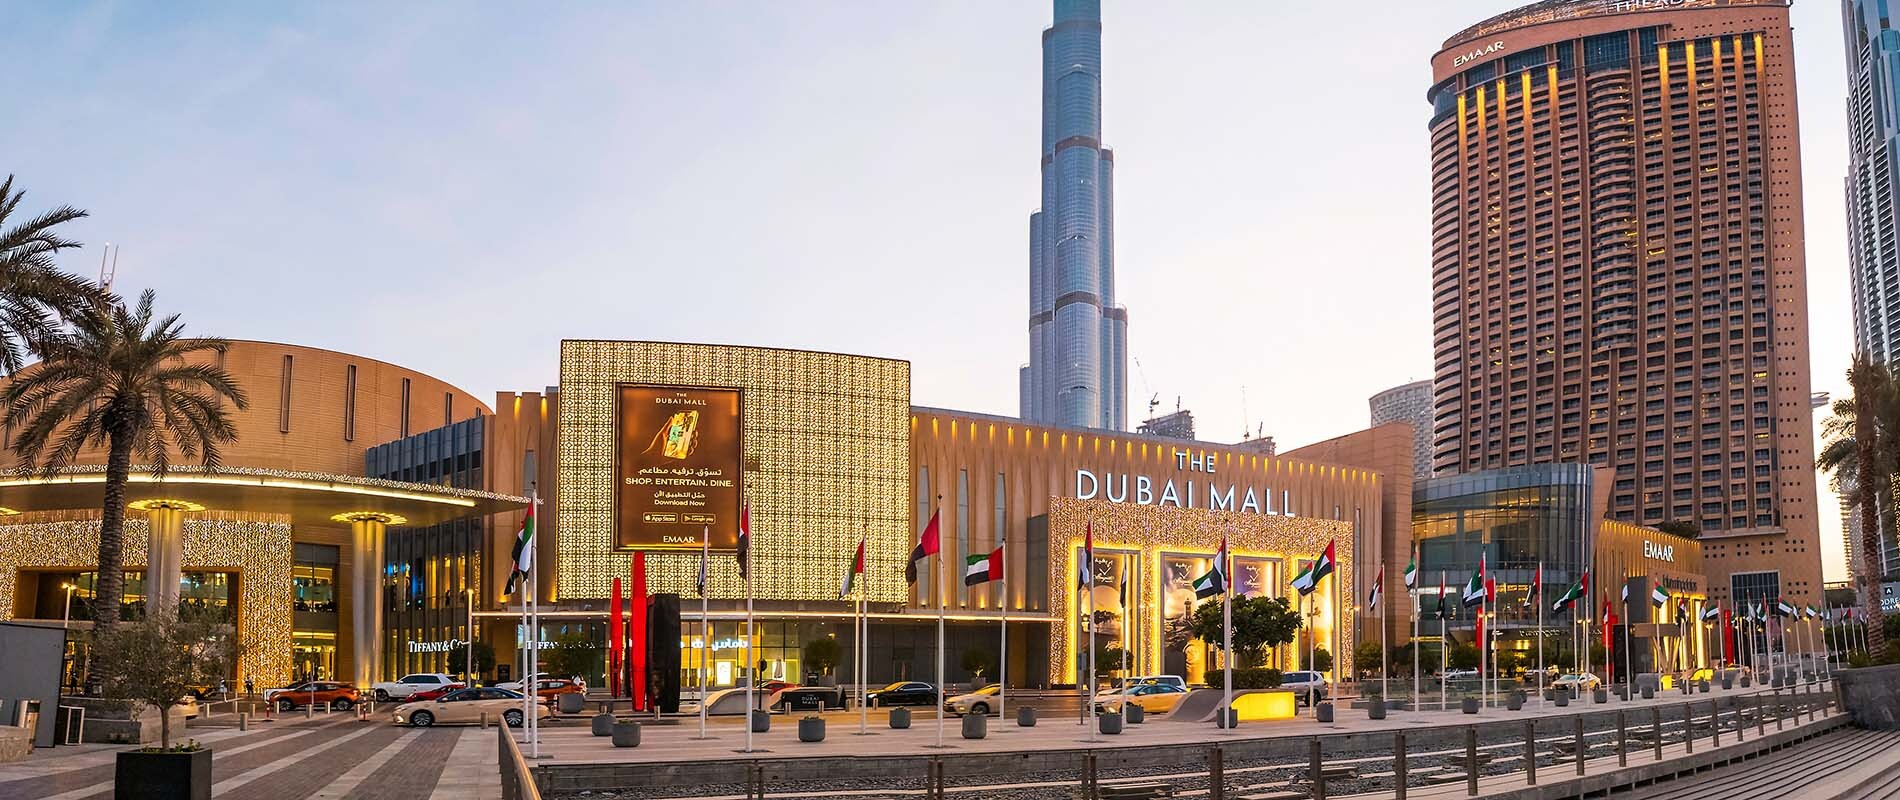 Dubai Mall is near Burj Khalifa and it is a vibrant space with thousands of stores and hundreds of activities